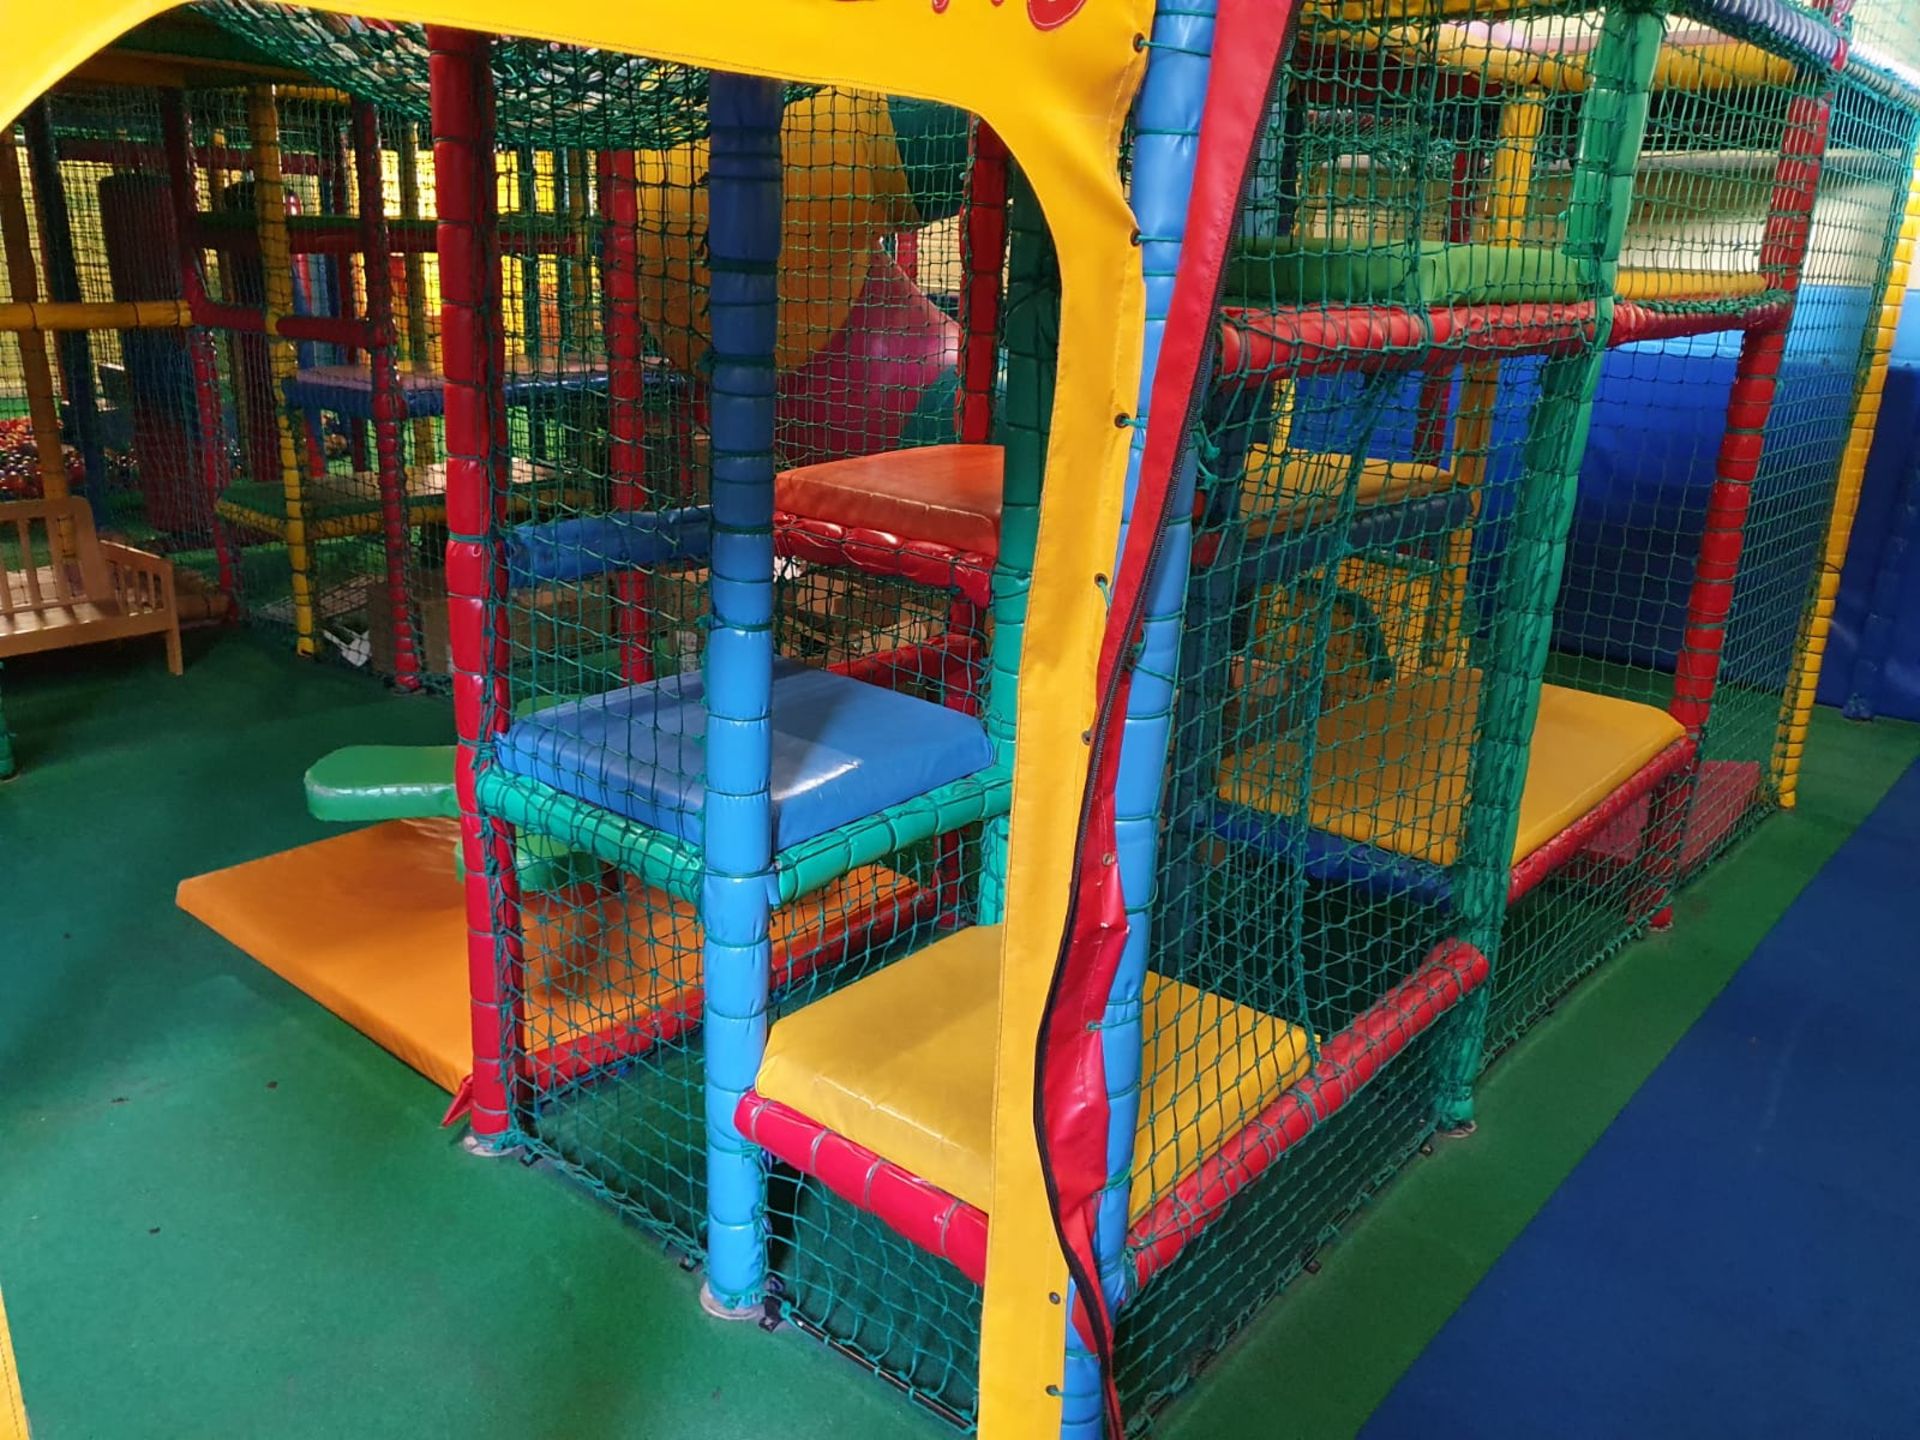 Bramleys Big Adventure Playground - Giant Action-Packed Playcentre With Slides, Zip Line Swings, - Image 103 of 128